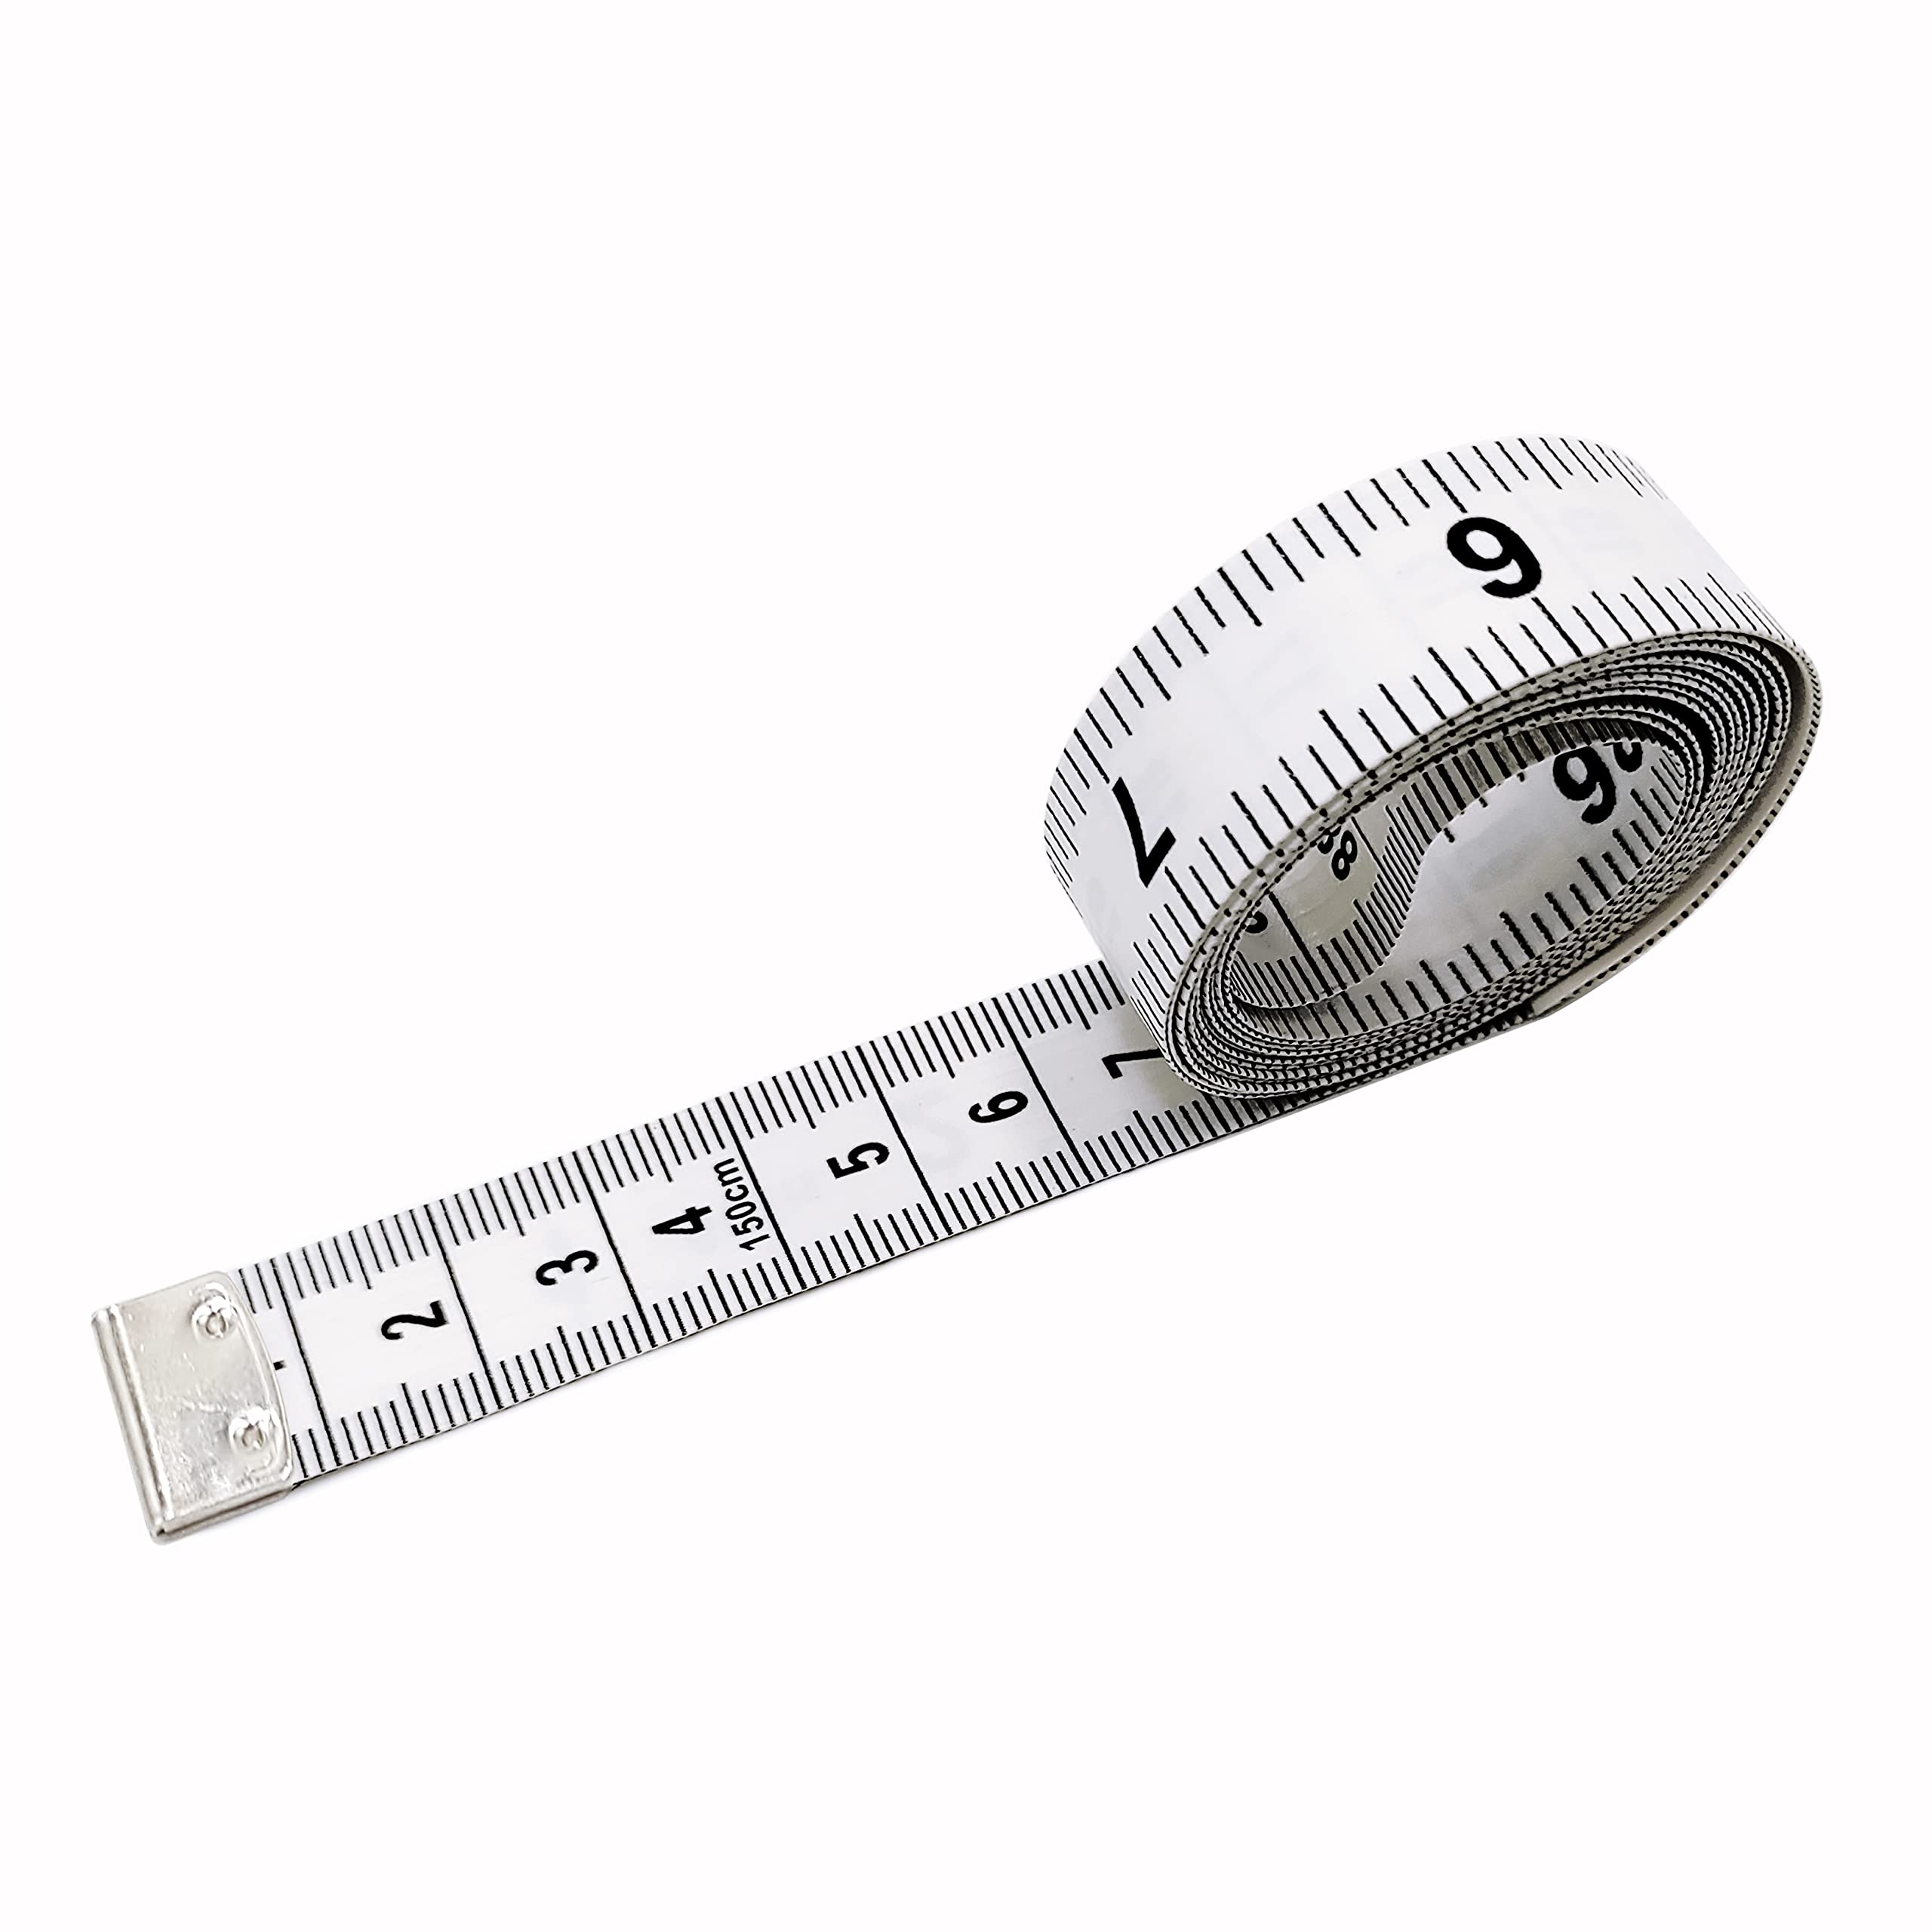 oditton Soft Measuring Tape, Flexible Tape Measure, Double Scale Fabric  Tape Measure, for Body Sewing Tailor Weight Loss Craft Ruler,150cm/60